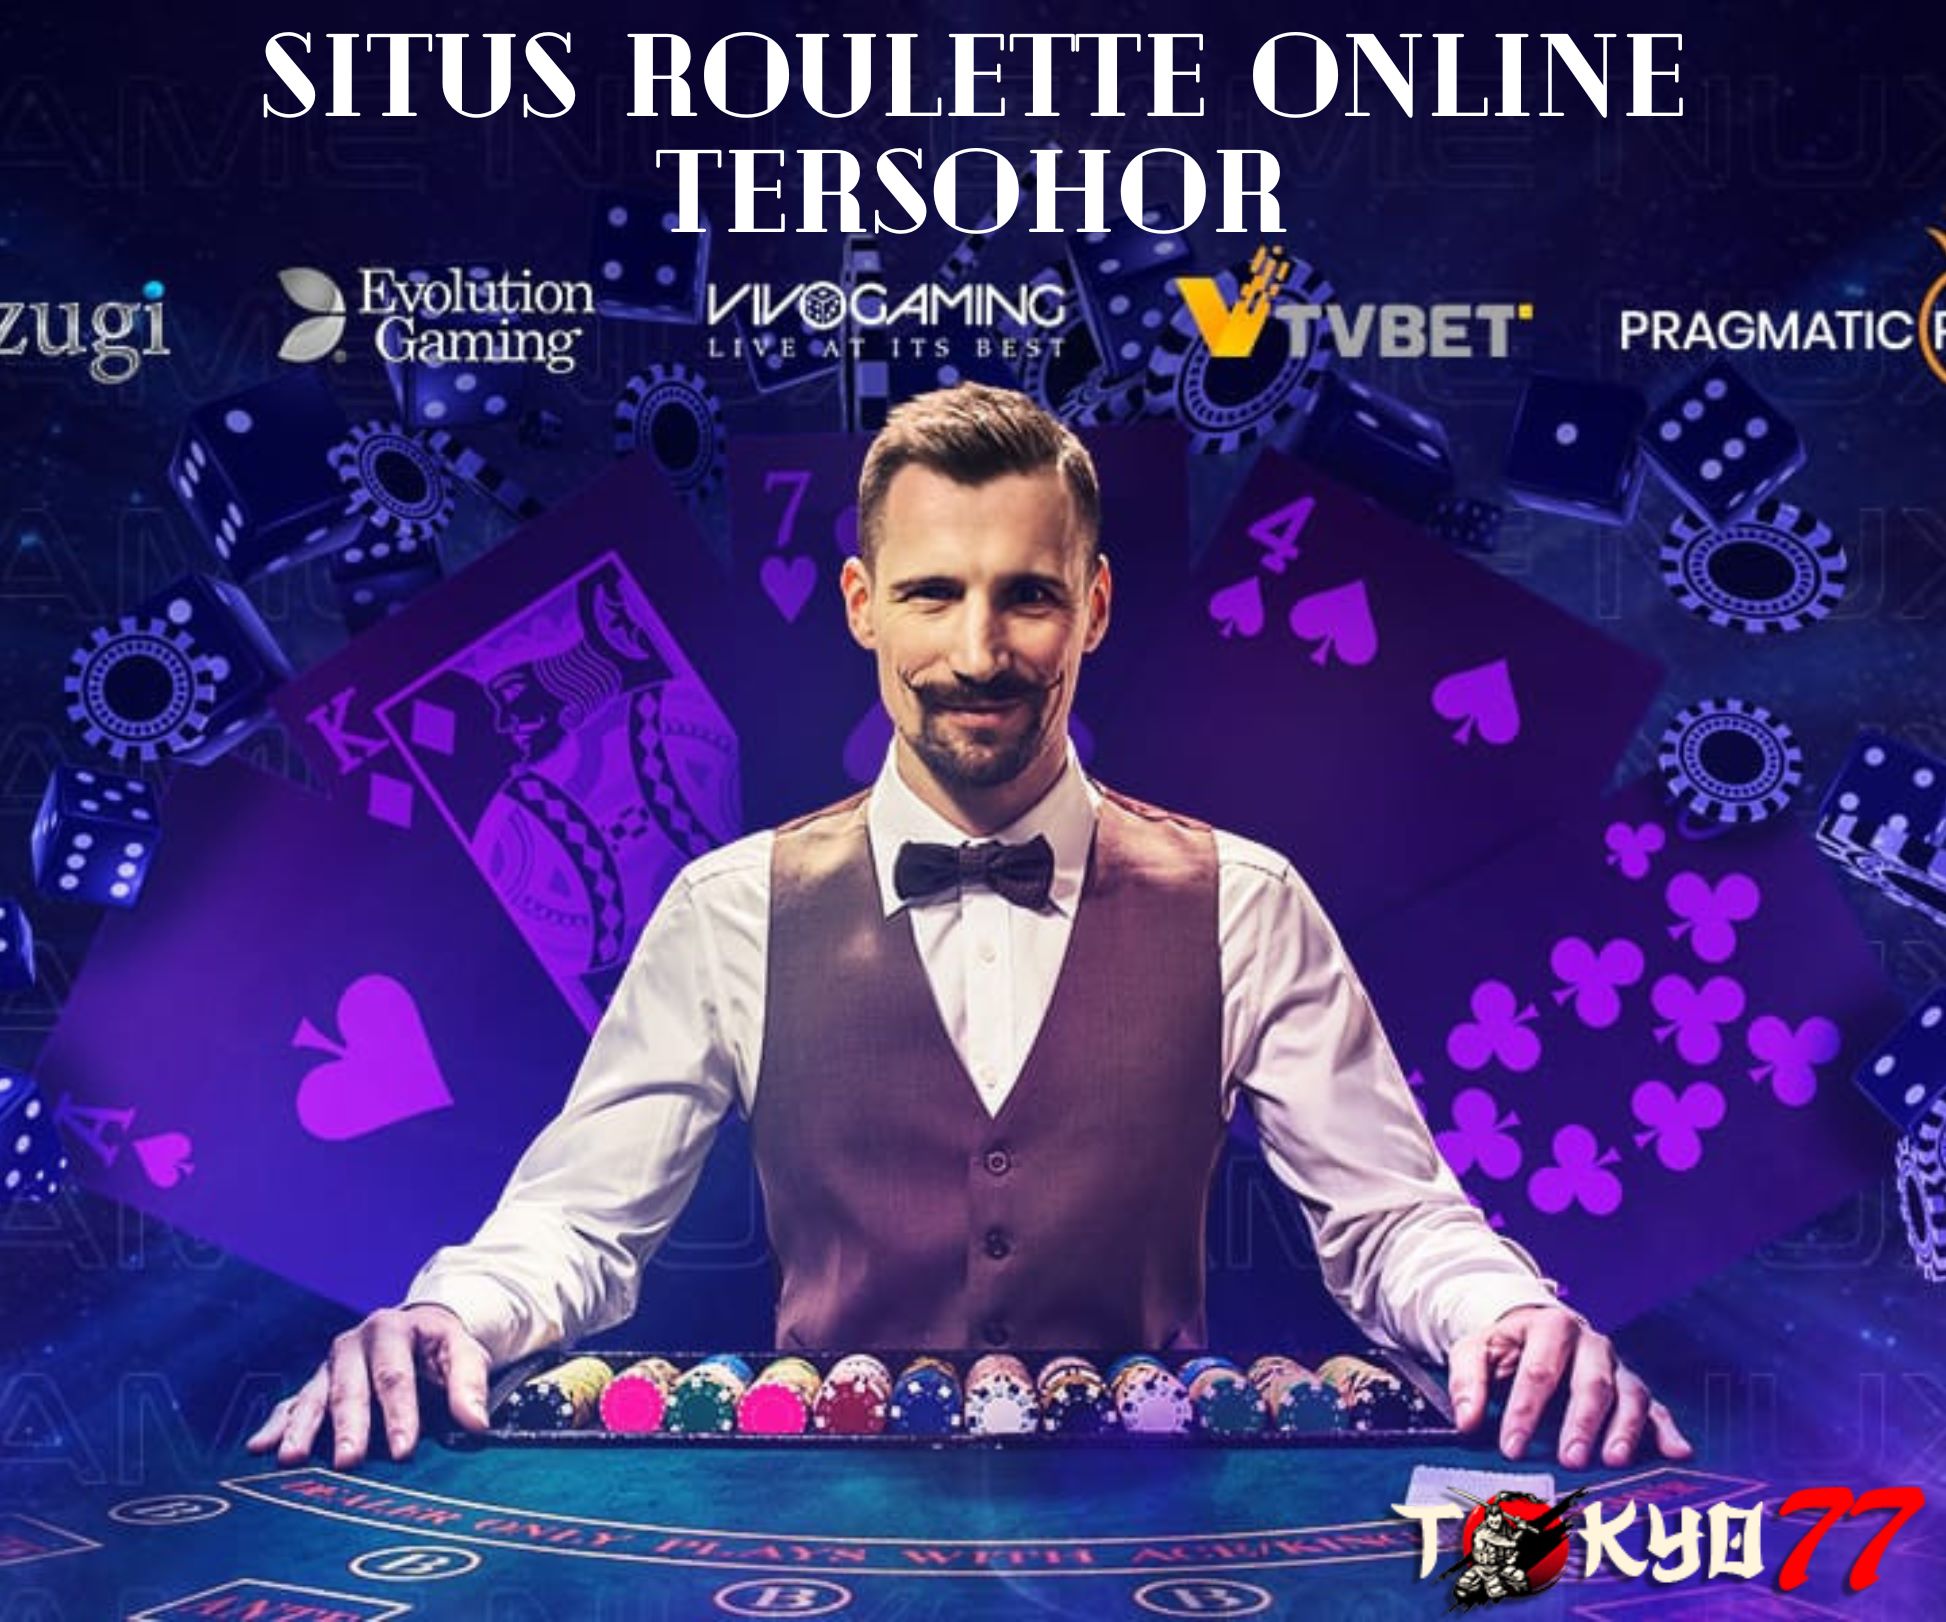 Roulette: A Live Casino Game That Gets Adrenaline